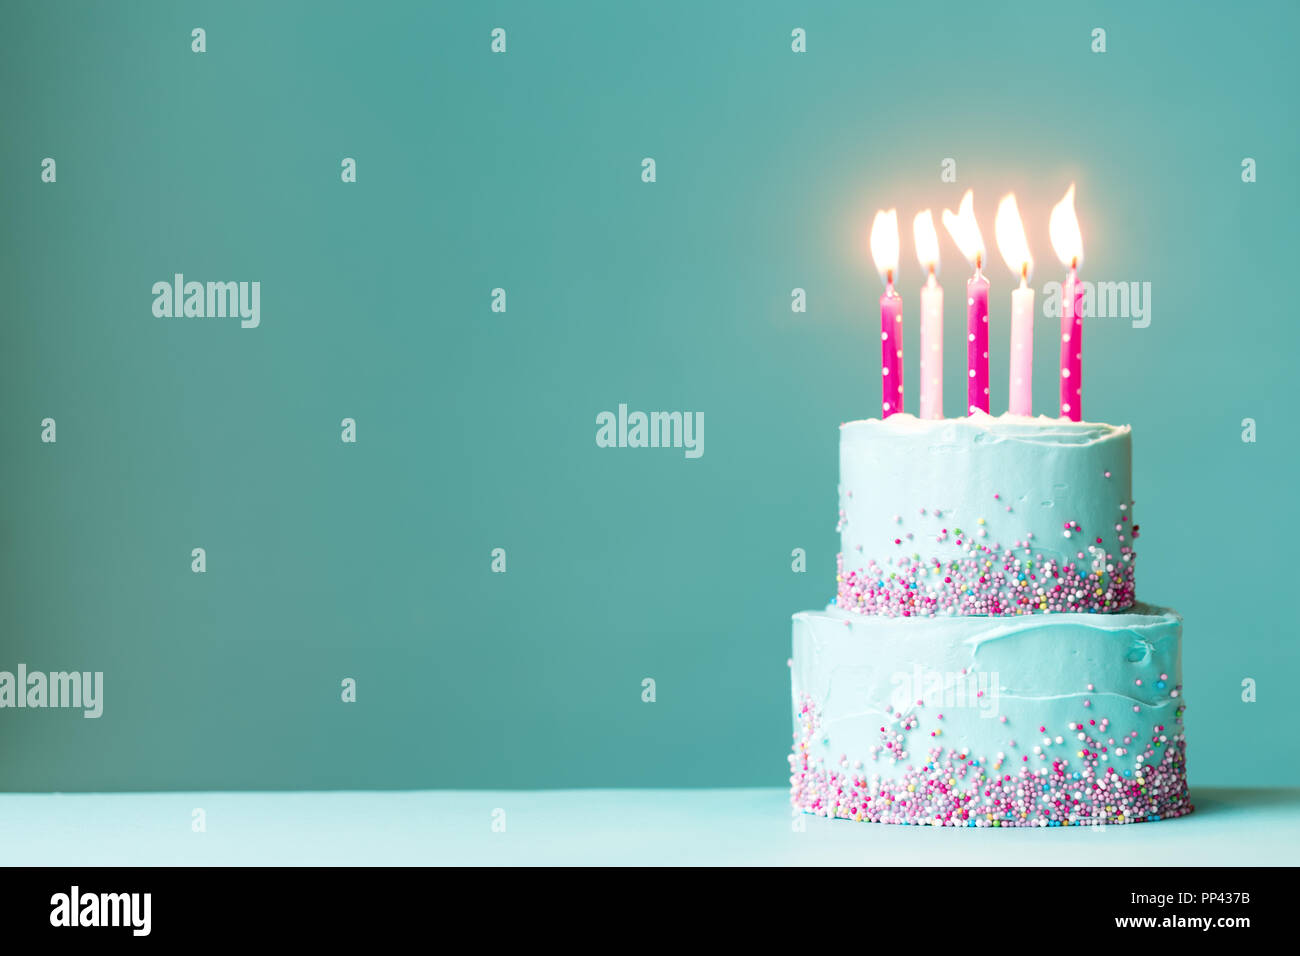 Tiered birthday cake with pink candles and sprinkles Stock Photo